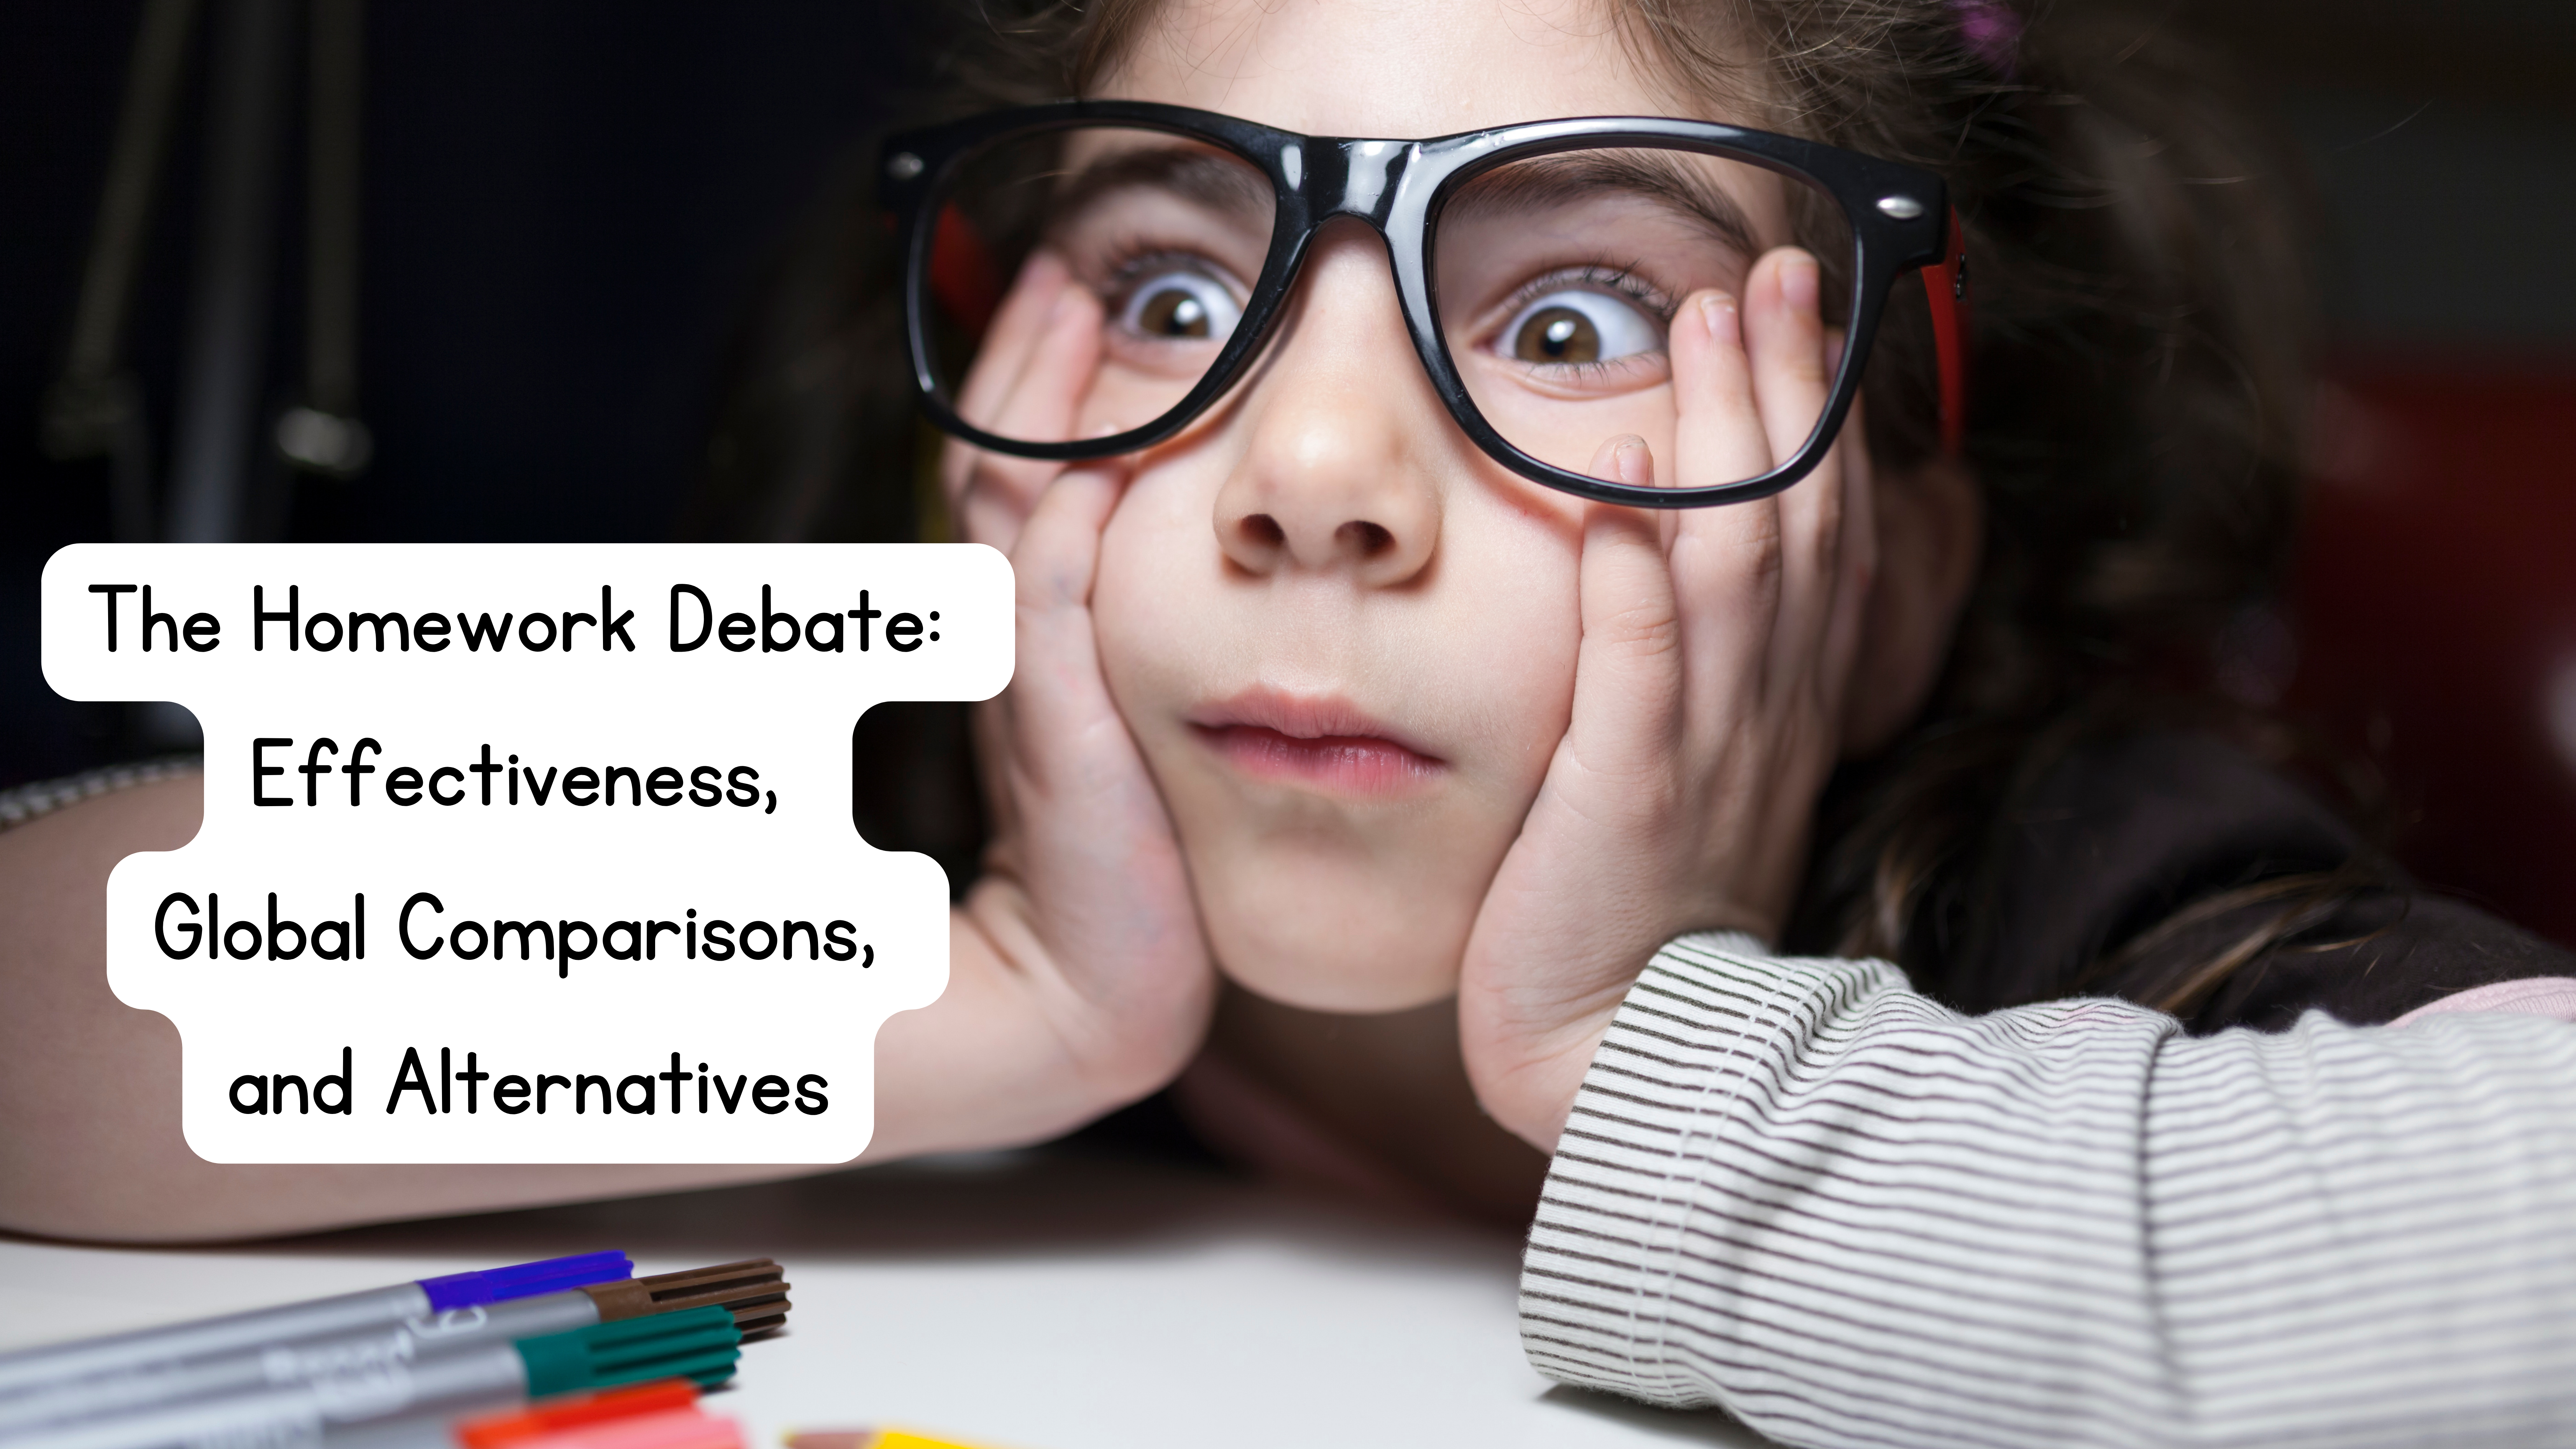 You are currently viewing The Homework Debate: Effectiveness, Global Comparisons, and Alternatives